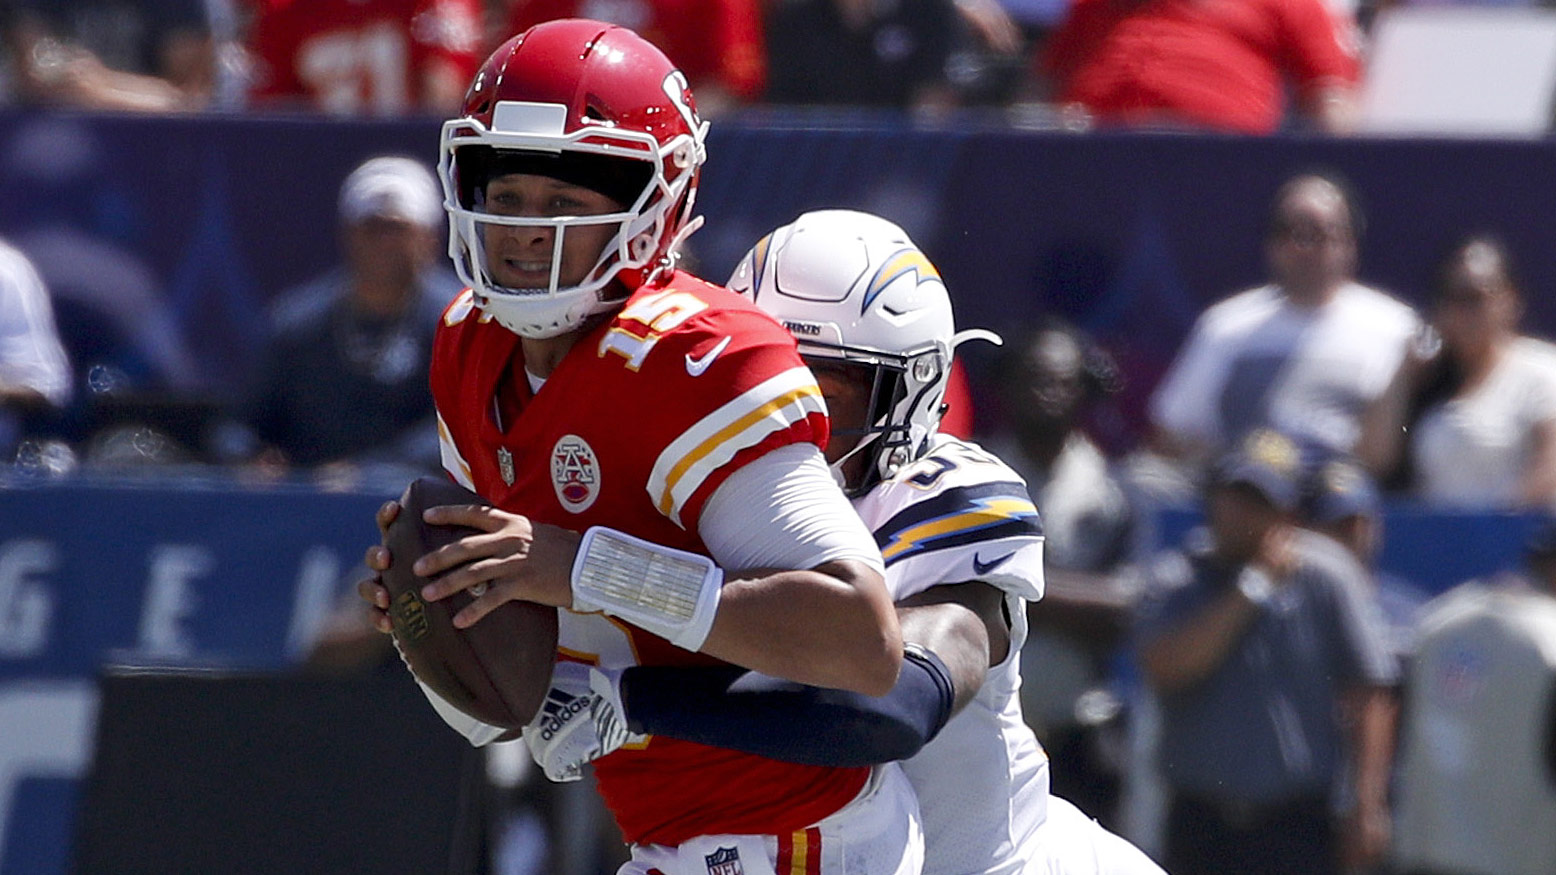 Despite near flawless Week 1, Mahomes and Chiefs looking for ways to improve